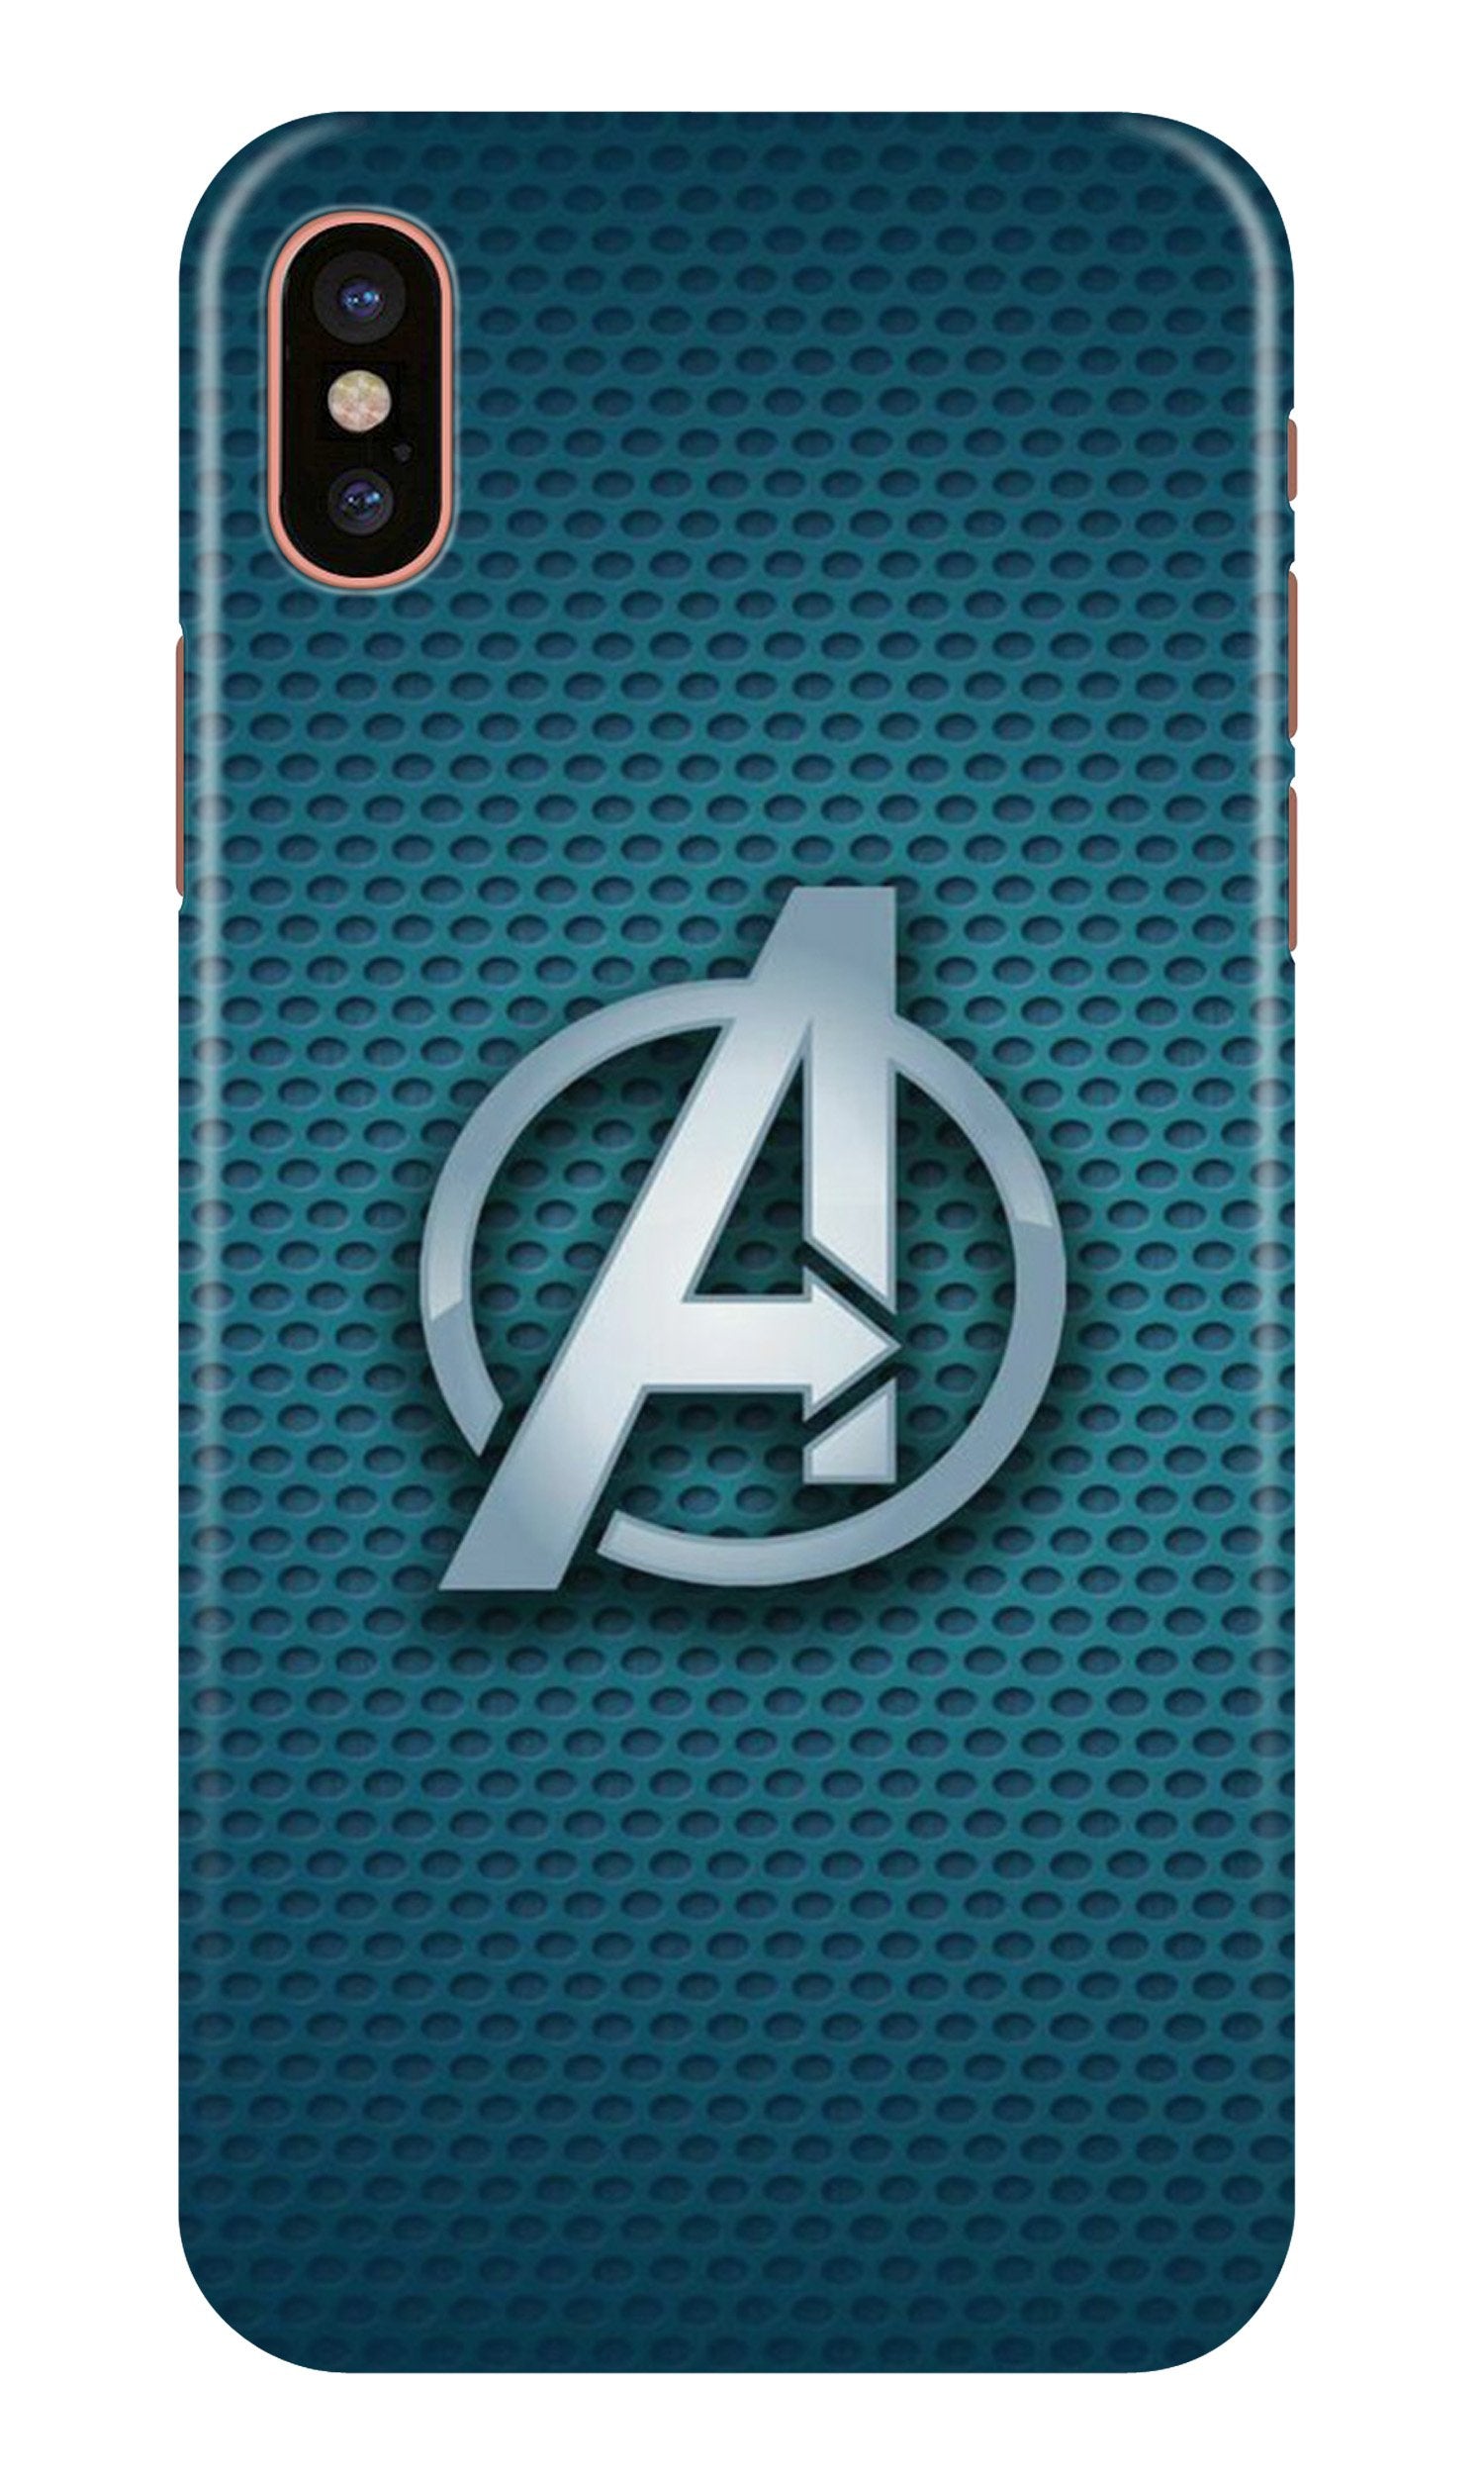 Avengers Case for iPhone Xr (Design No. 246)